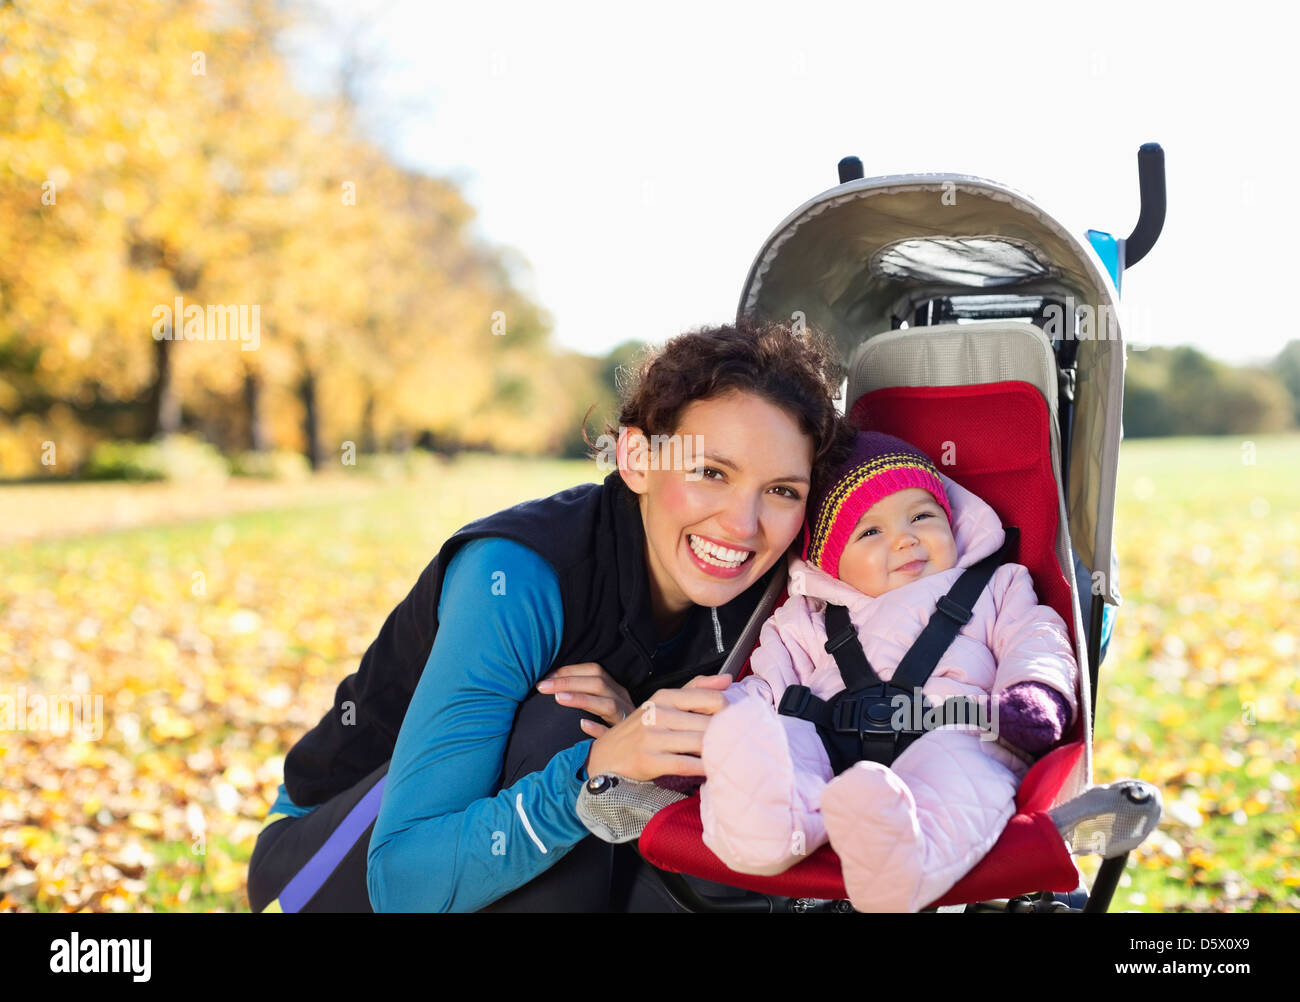 Woman smiling with baby in stroller Stock Photo